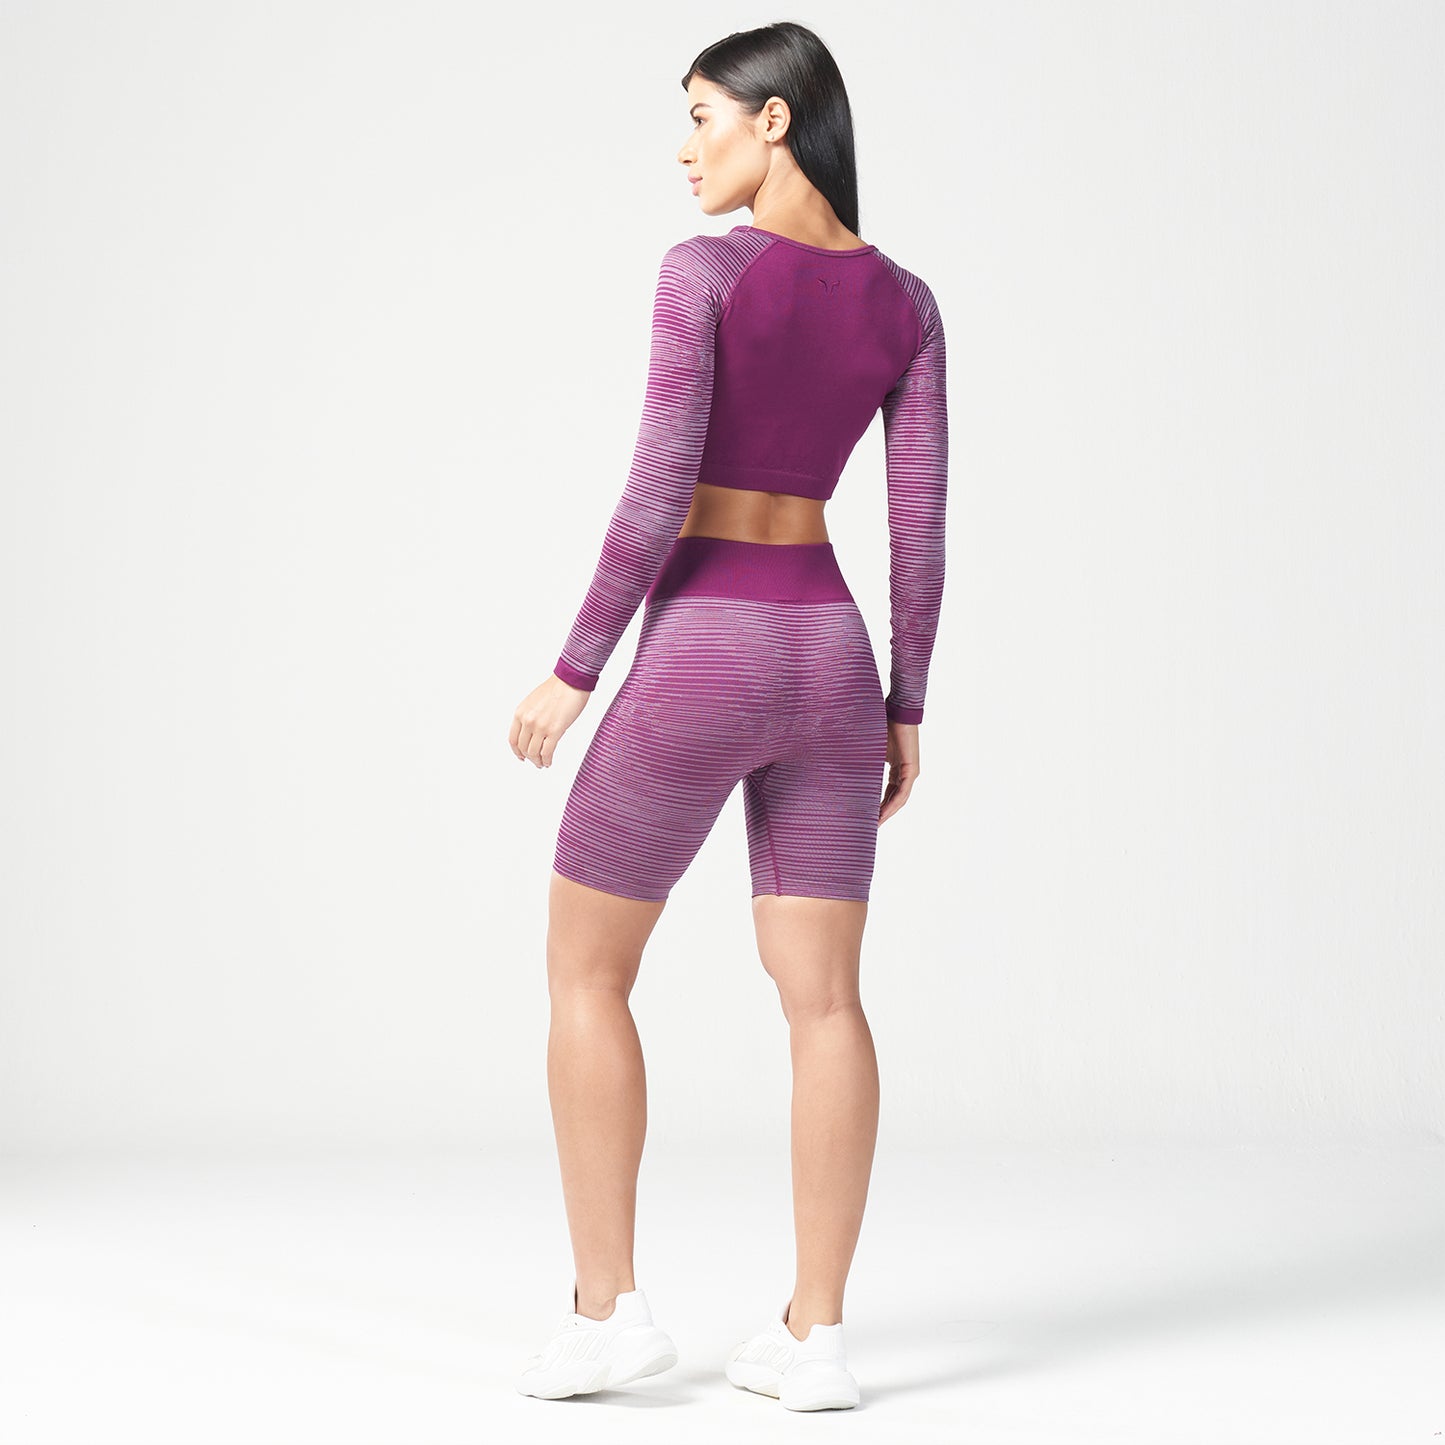 squatwolf-workout-clothes-infinity-stripe-seamless-shorts-dark-purple-gym-shorts-for-women